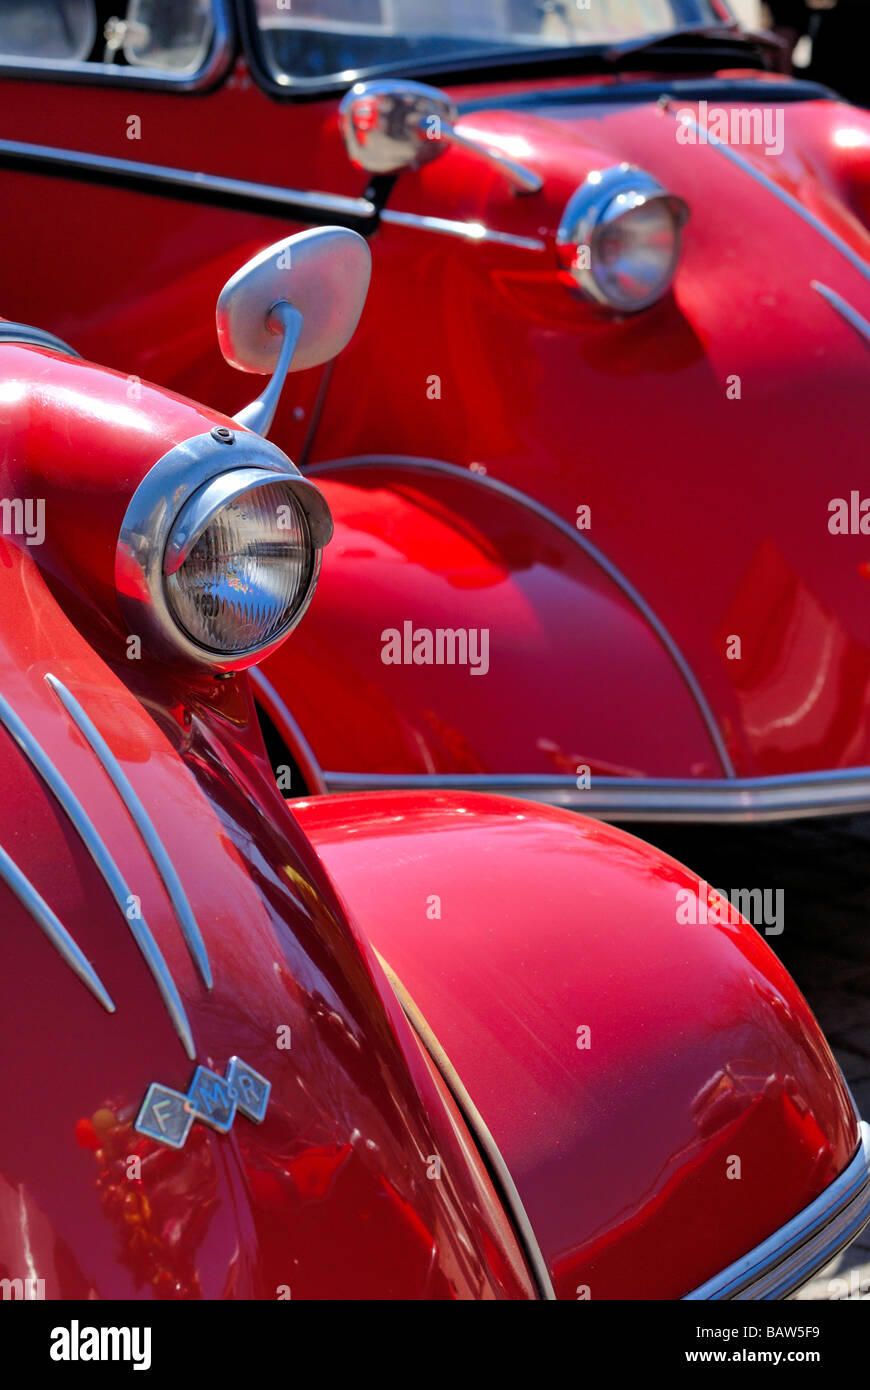 Two Messerschmitt KR200 microcars after May Day joy ride parked in the Kaivopuisto park, Helsinki. The only carnival like celebr Stock Photo